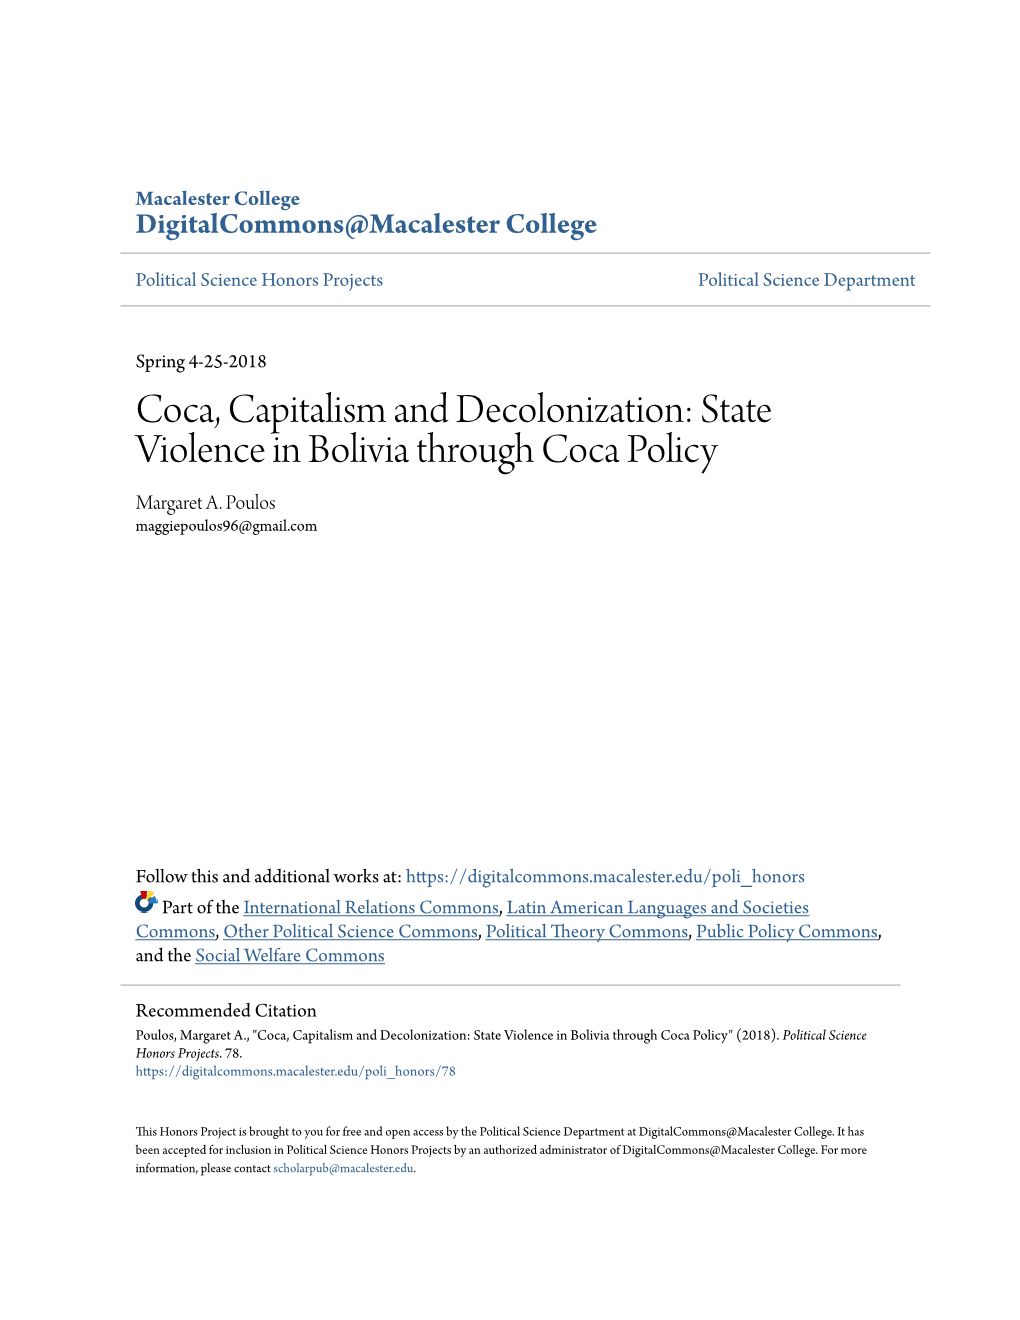 Coca, Capitalism and Decolonization: State Violence in Bolivia Through Coca Policy Margaret A